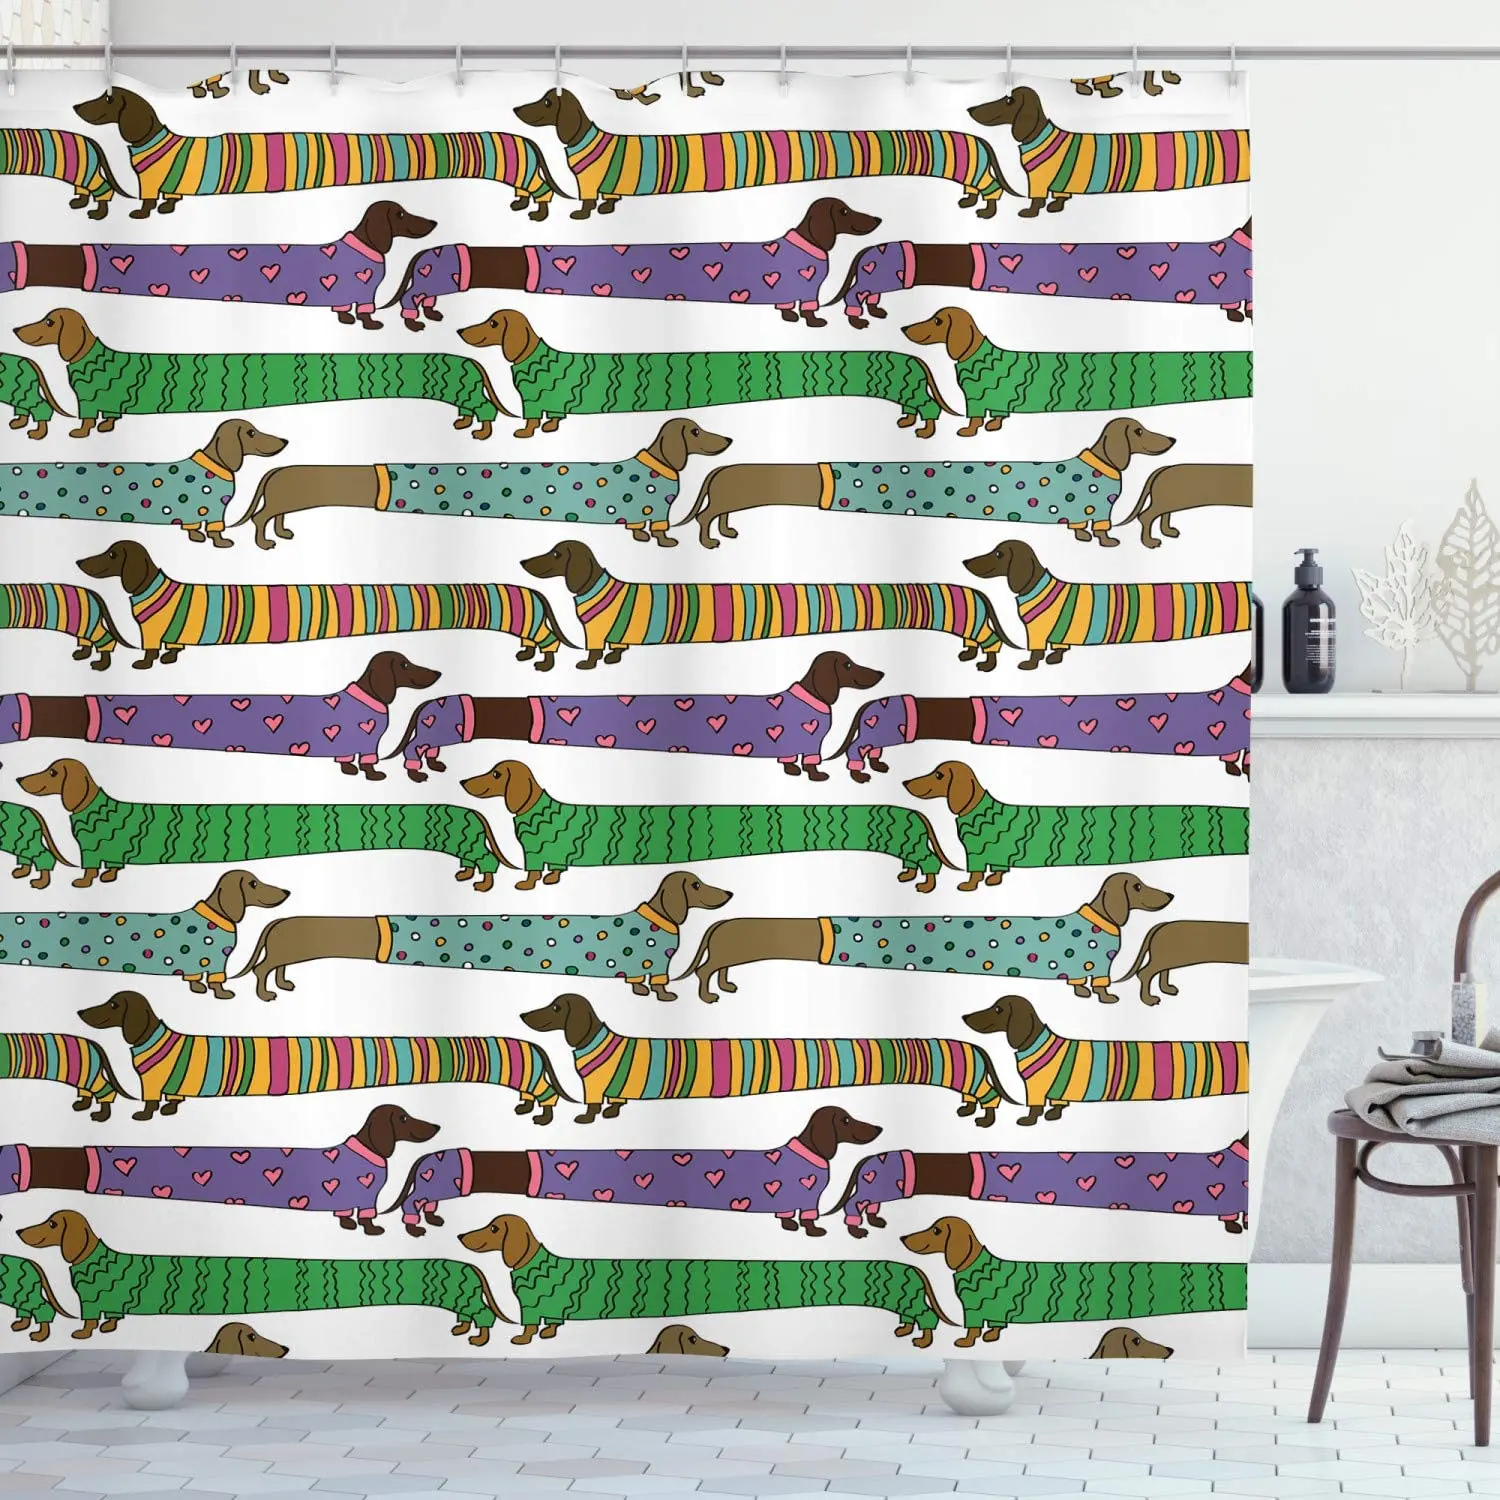 

Dog Lover Shower Curtain, Cartoon Style Dachshunds Dressed in Pyjamas Chevron Lines Polka Dots and Hearts, Cloth Fabri